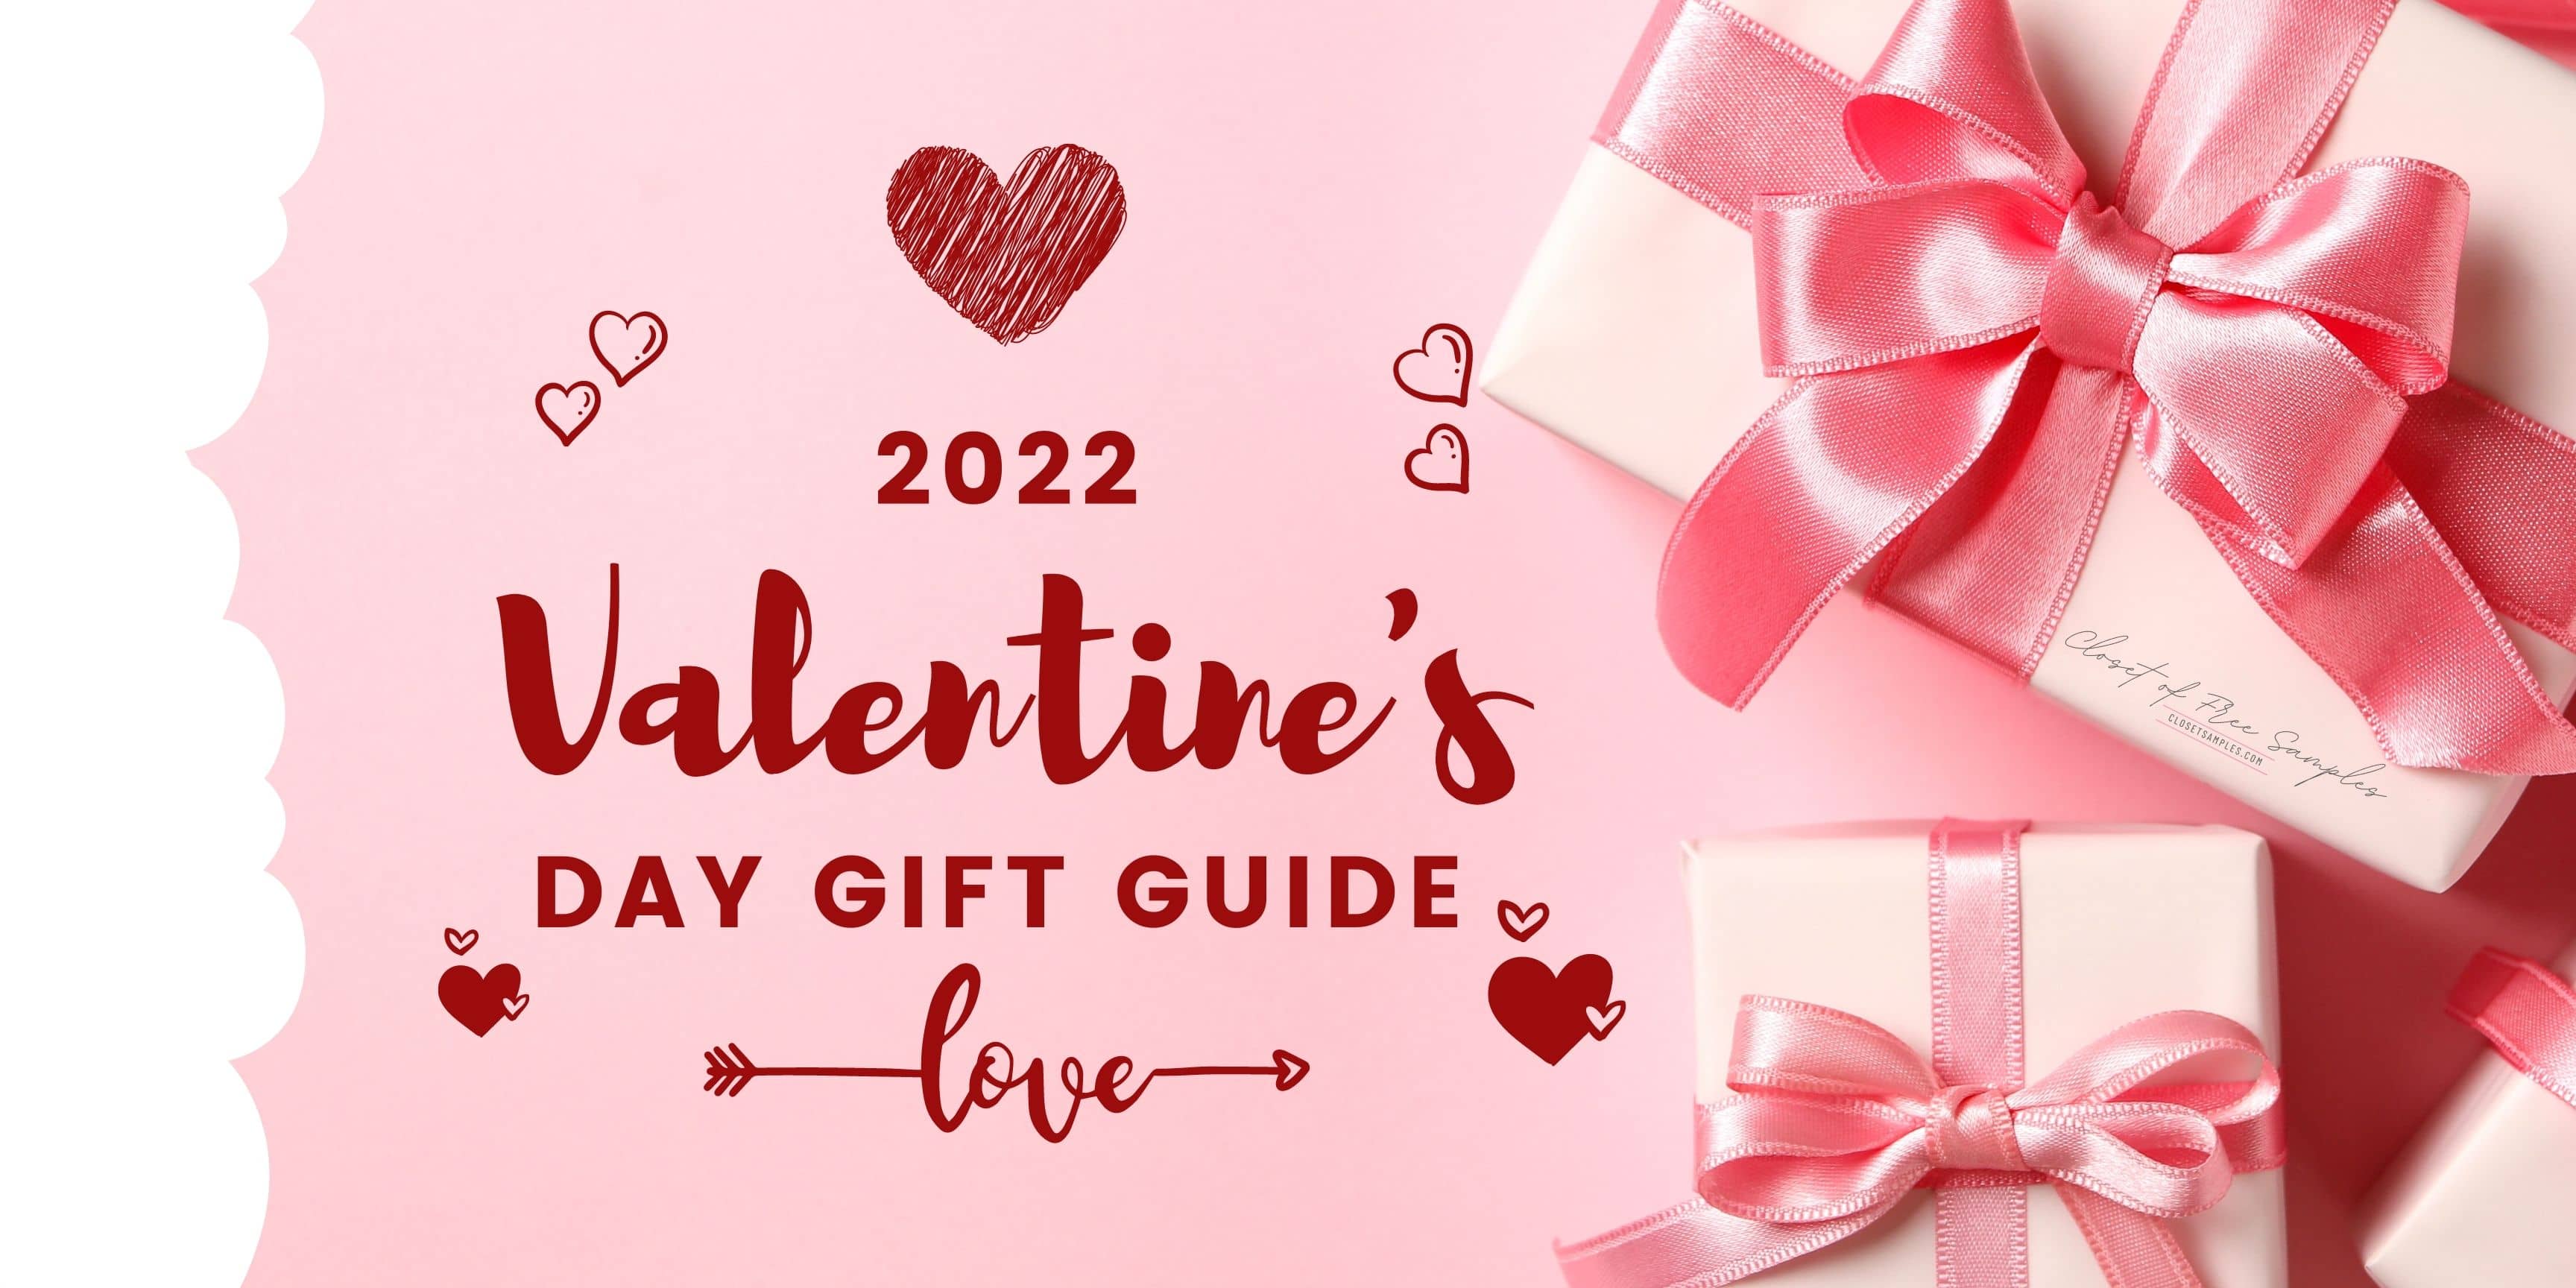 2022 Valentines Day Gift Guide Gift Ideas Closetsamples